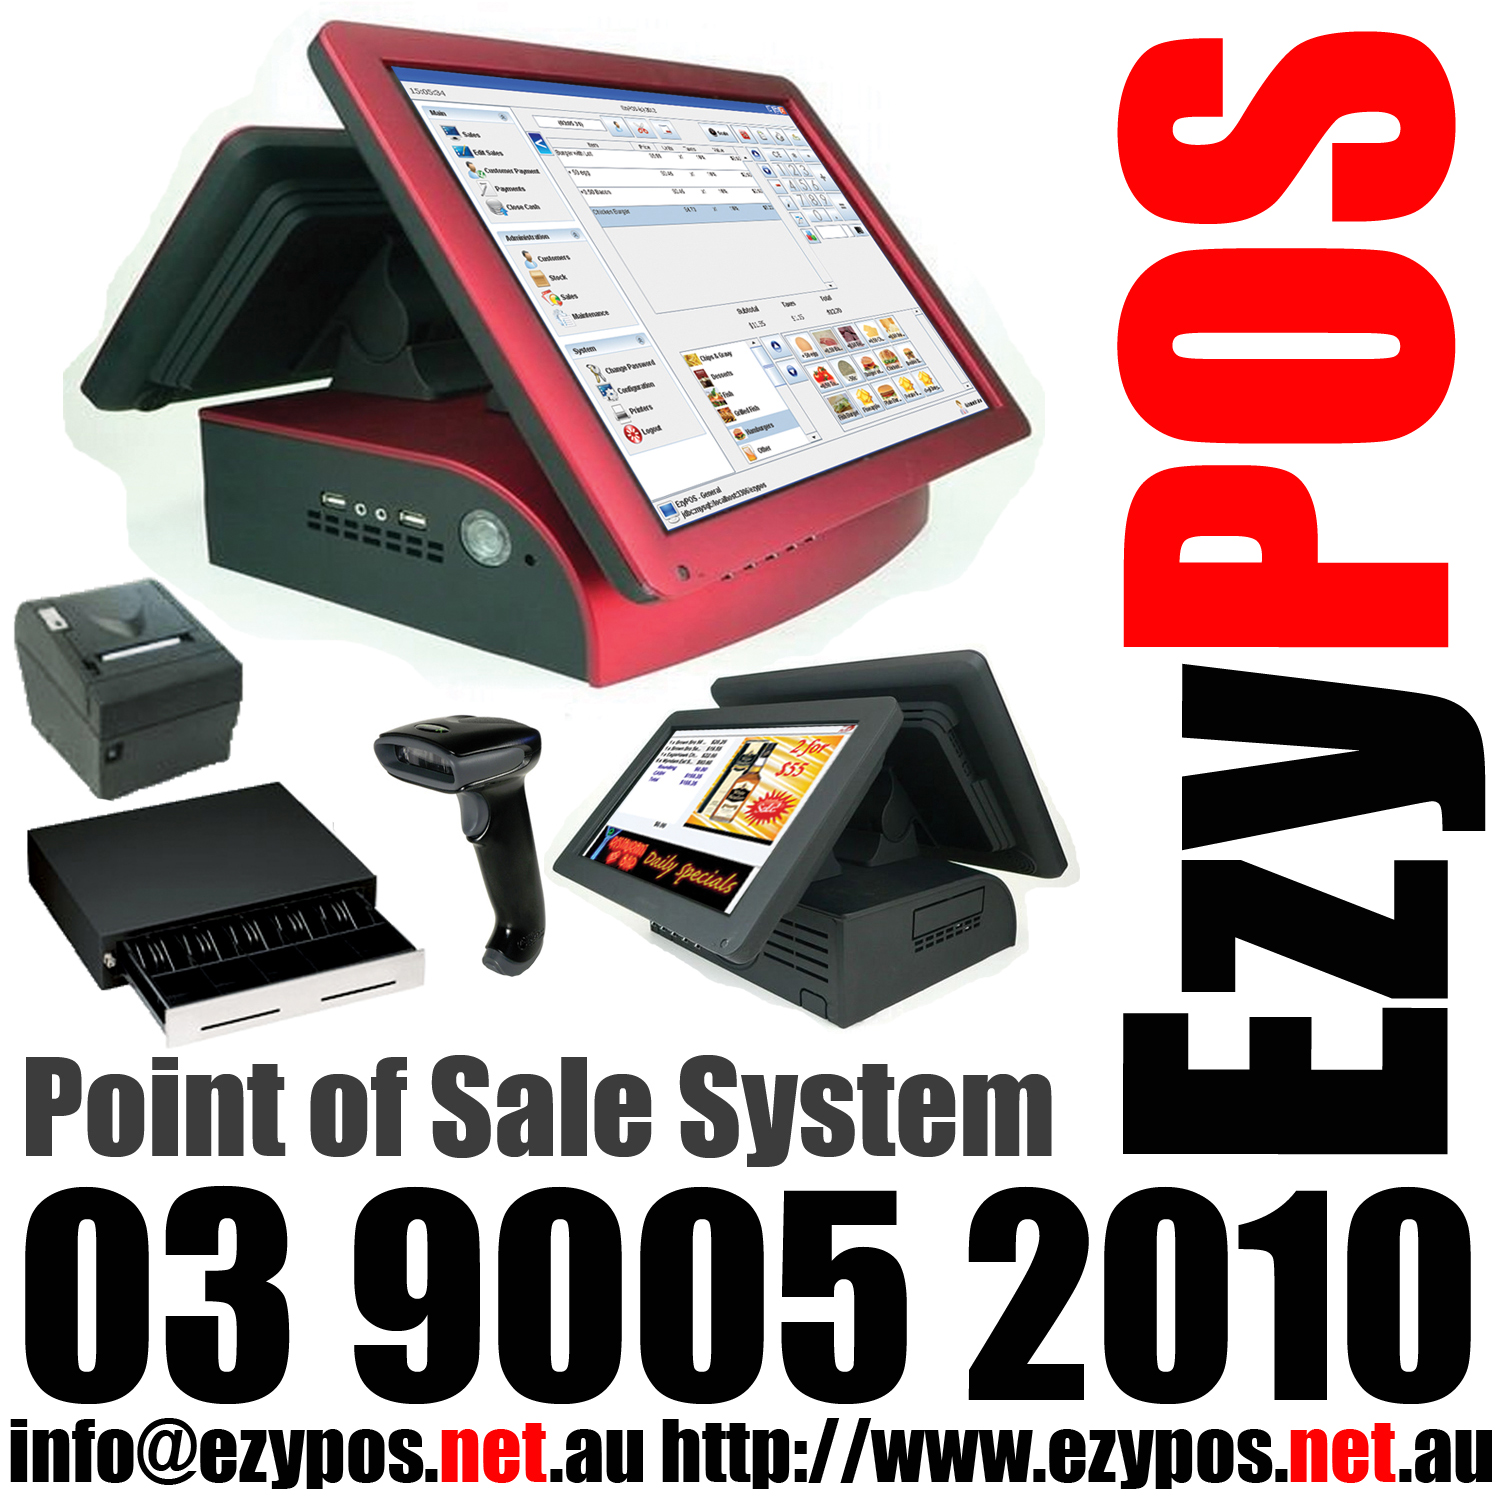 MiPOS Point of Sale Systems